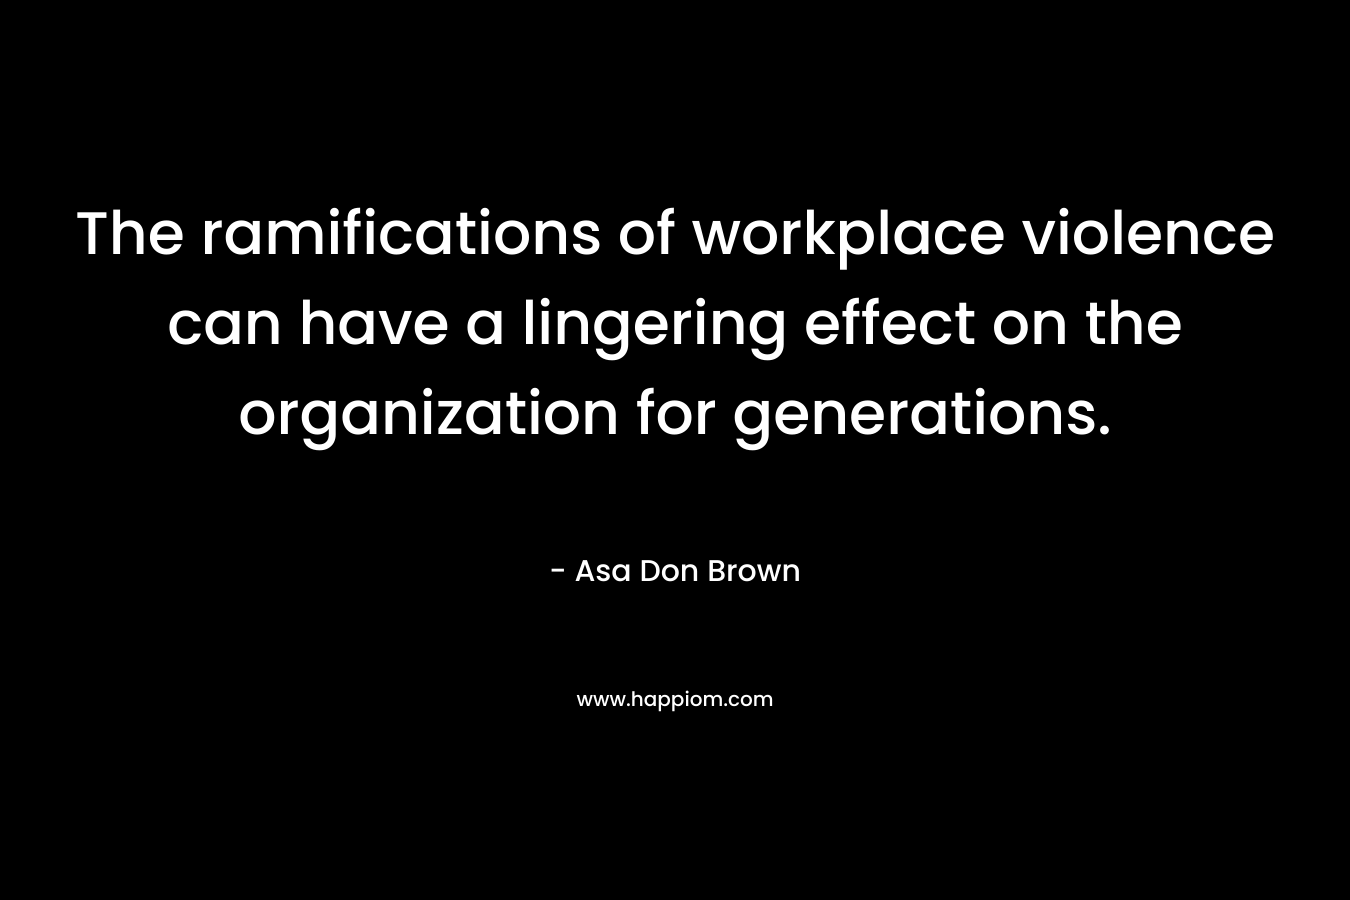 The ramifications of workplace violence can have a lingering effect on the organization for generations.